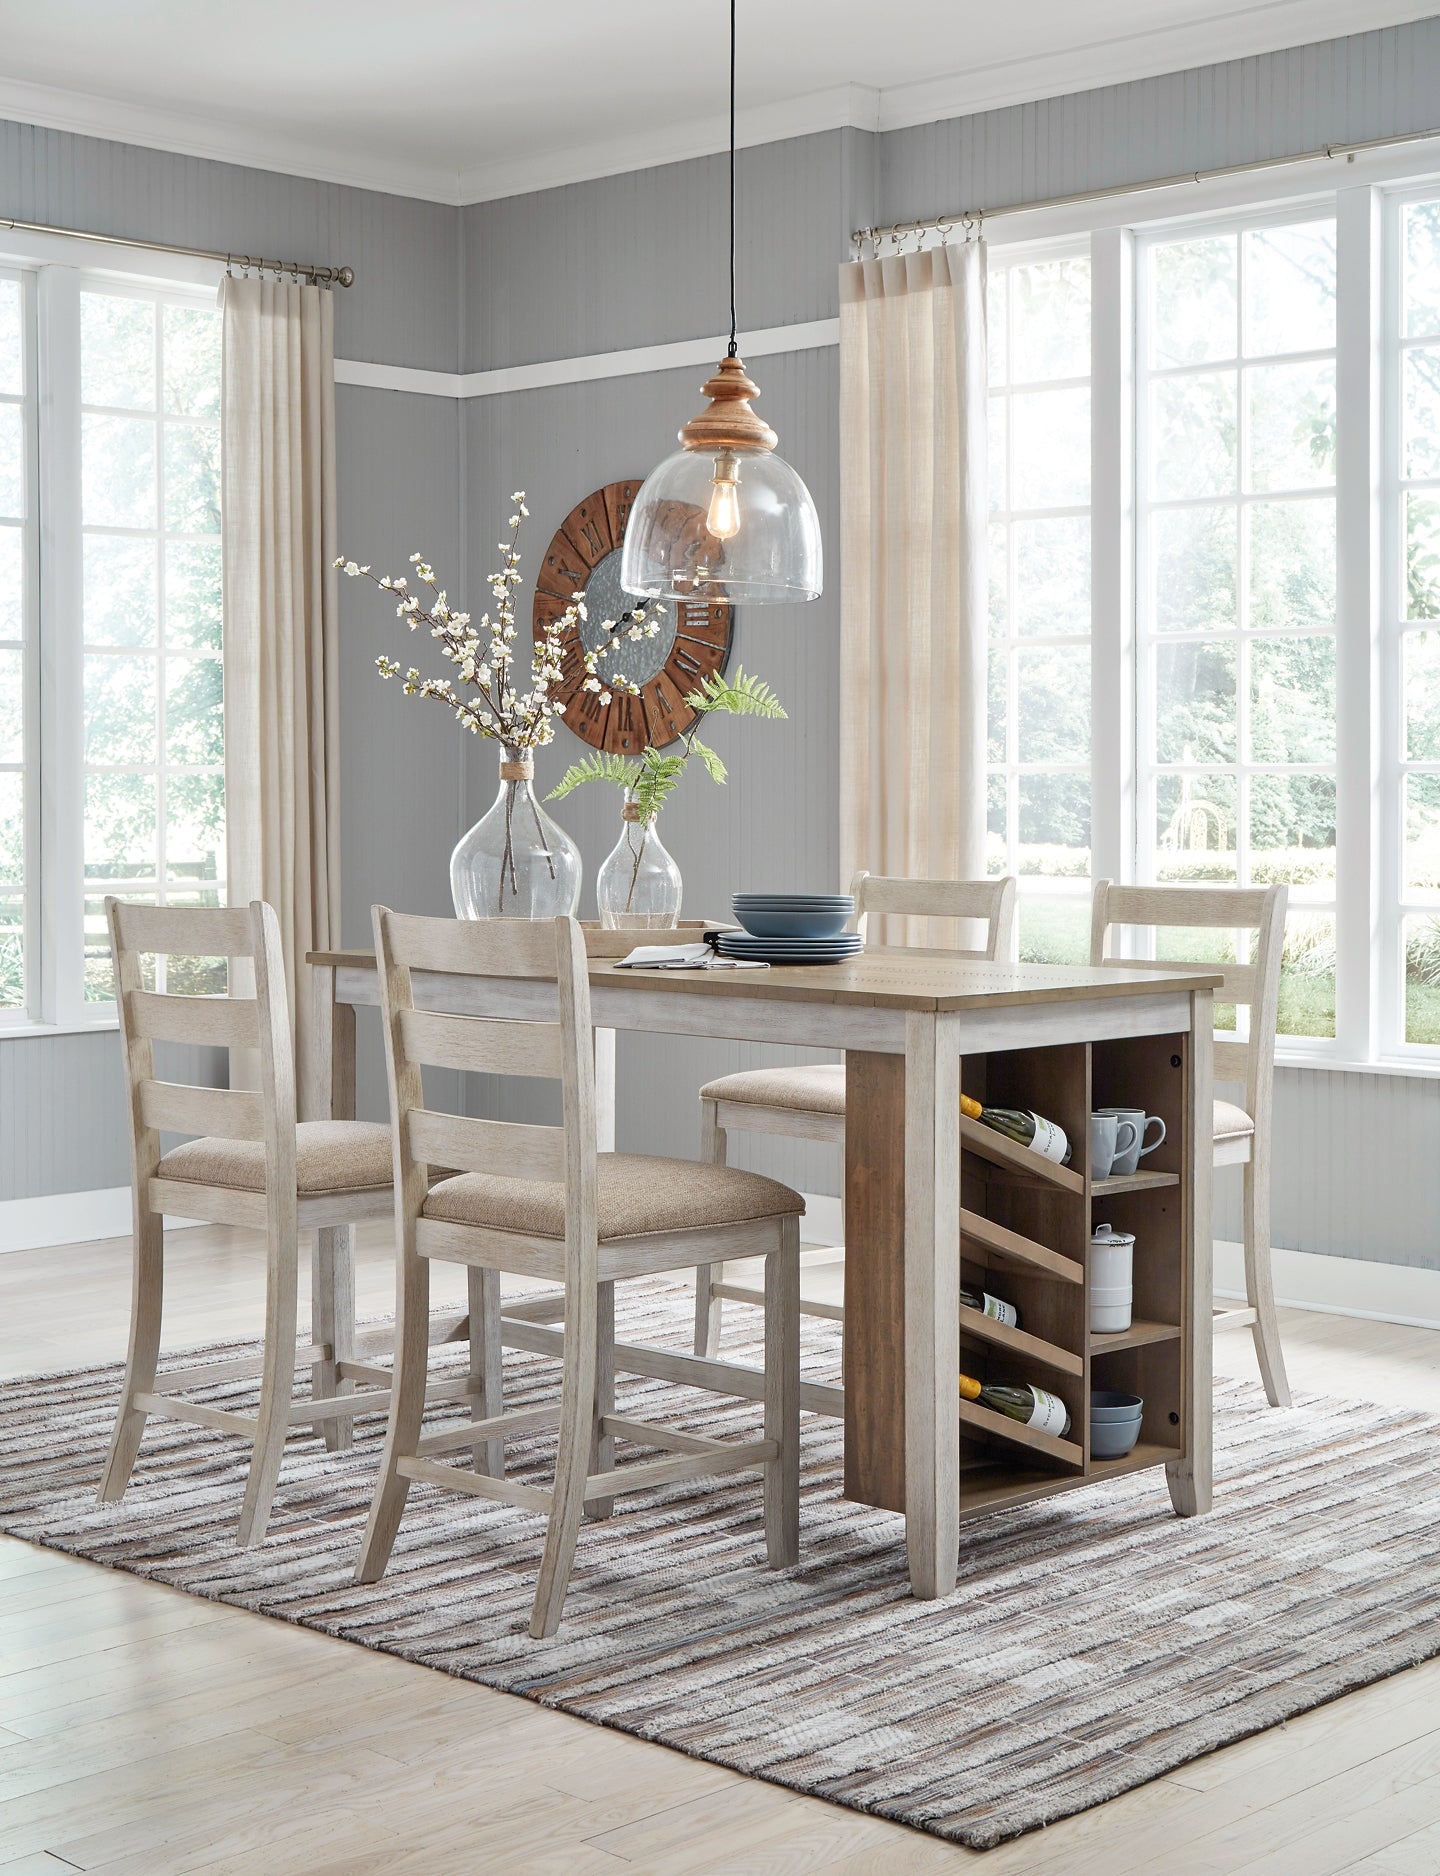 Skempton Counter Height Dining Table and 4 Barstools Wilson Furniture (OH)  in Bridgeport, Ohio. Serving Bridgeport, Yorkville, Bellaire, & Avondale